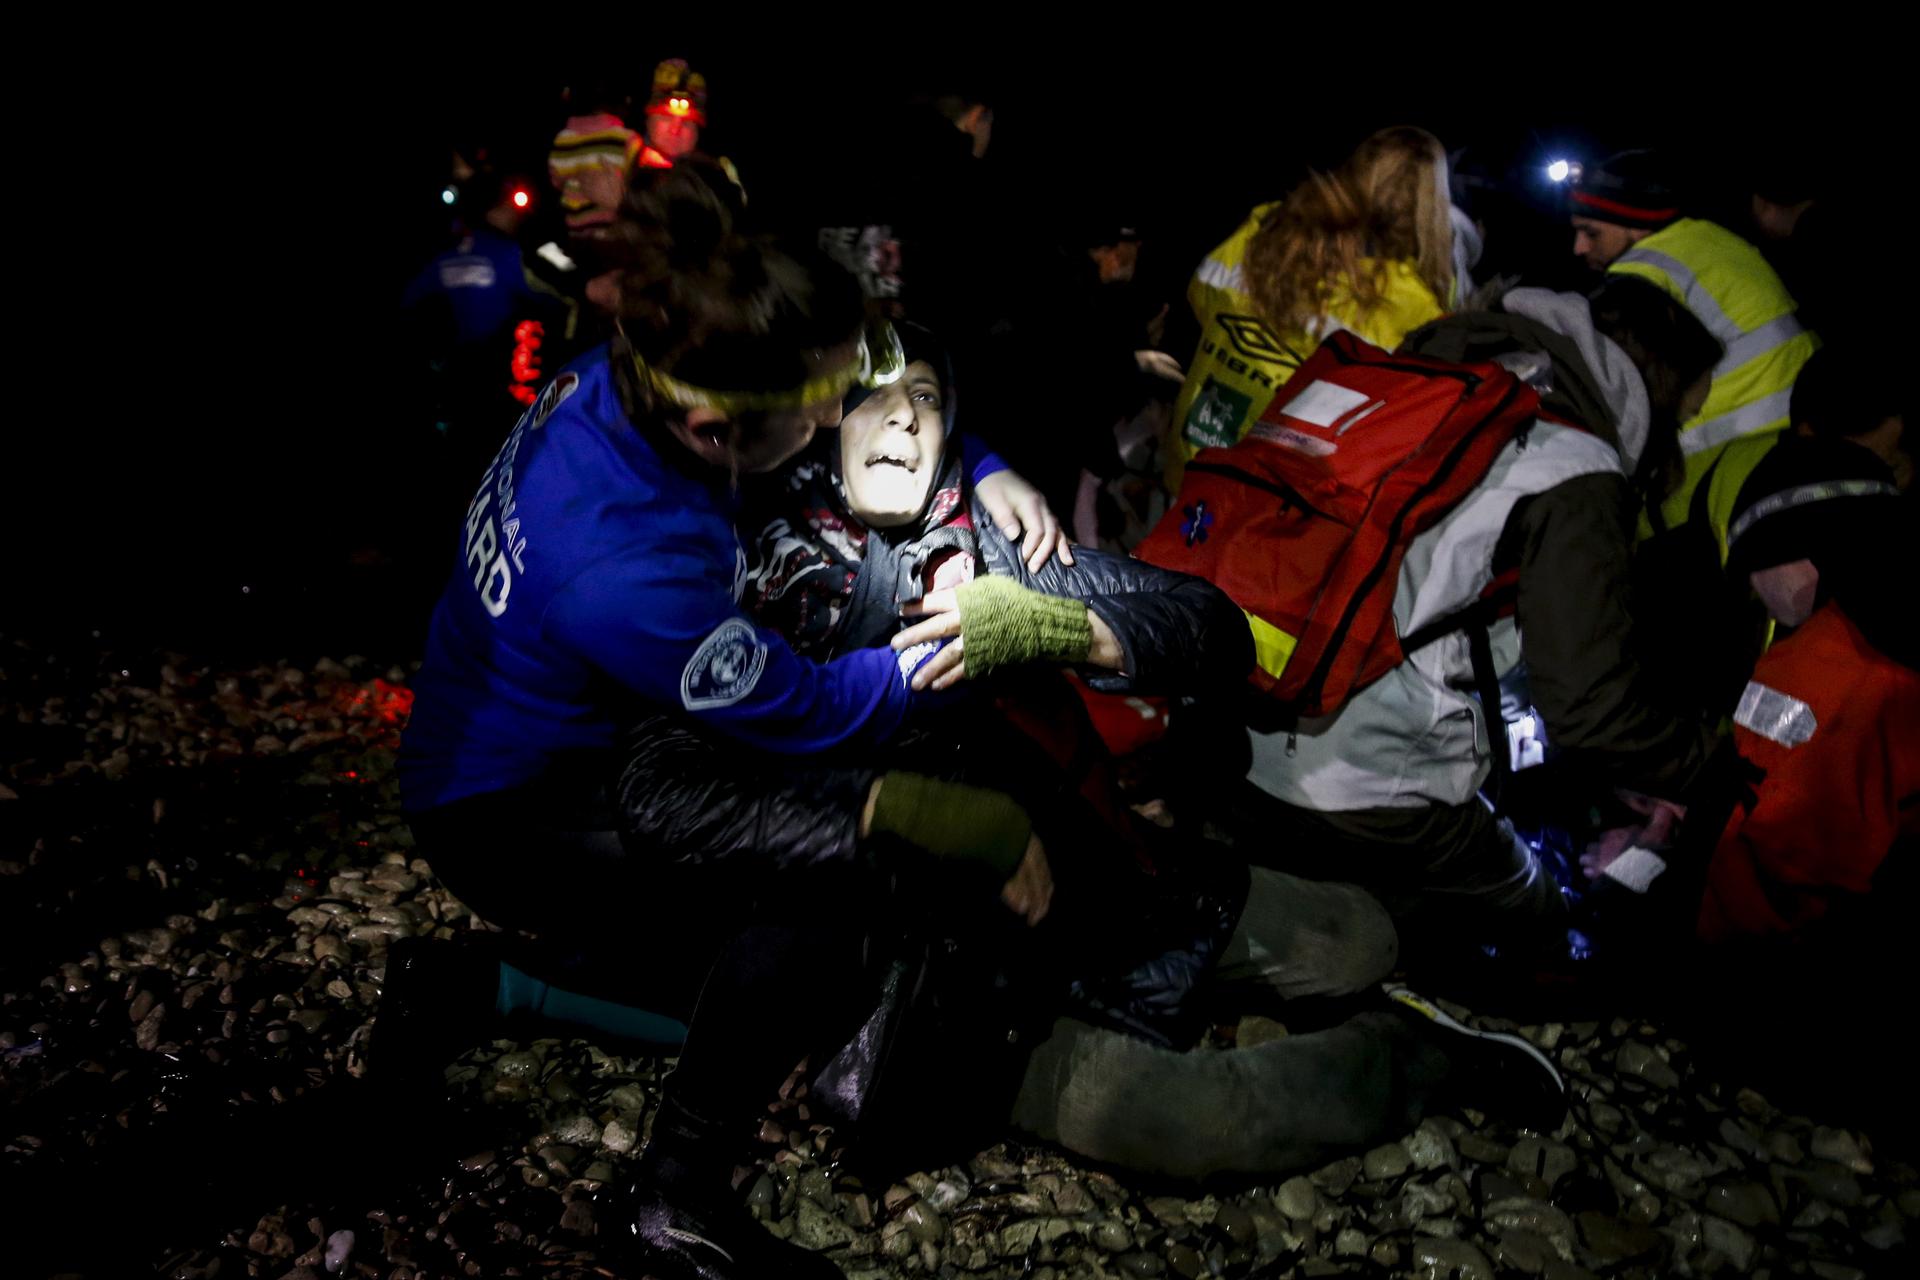 Rescuers try to revive an unconscious refugee who arrived on a dinghy on the Greek island of Lesbos. Two unconscious arrivals were taken to a hospital and were later pronounced dead.